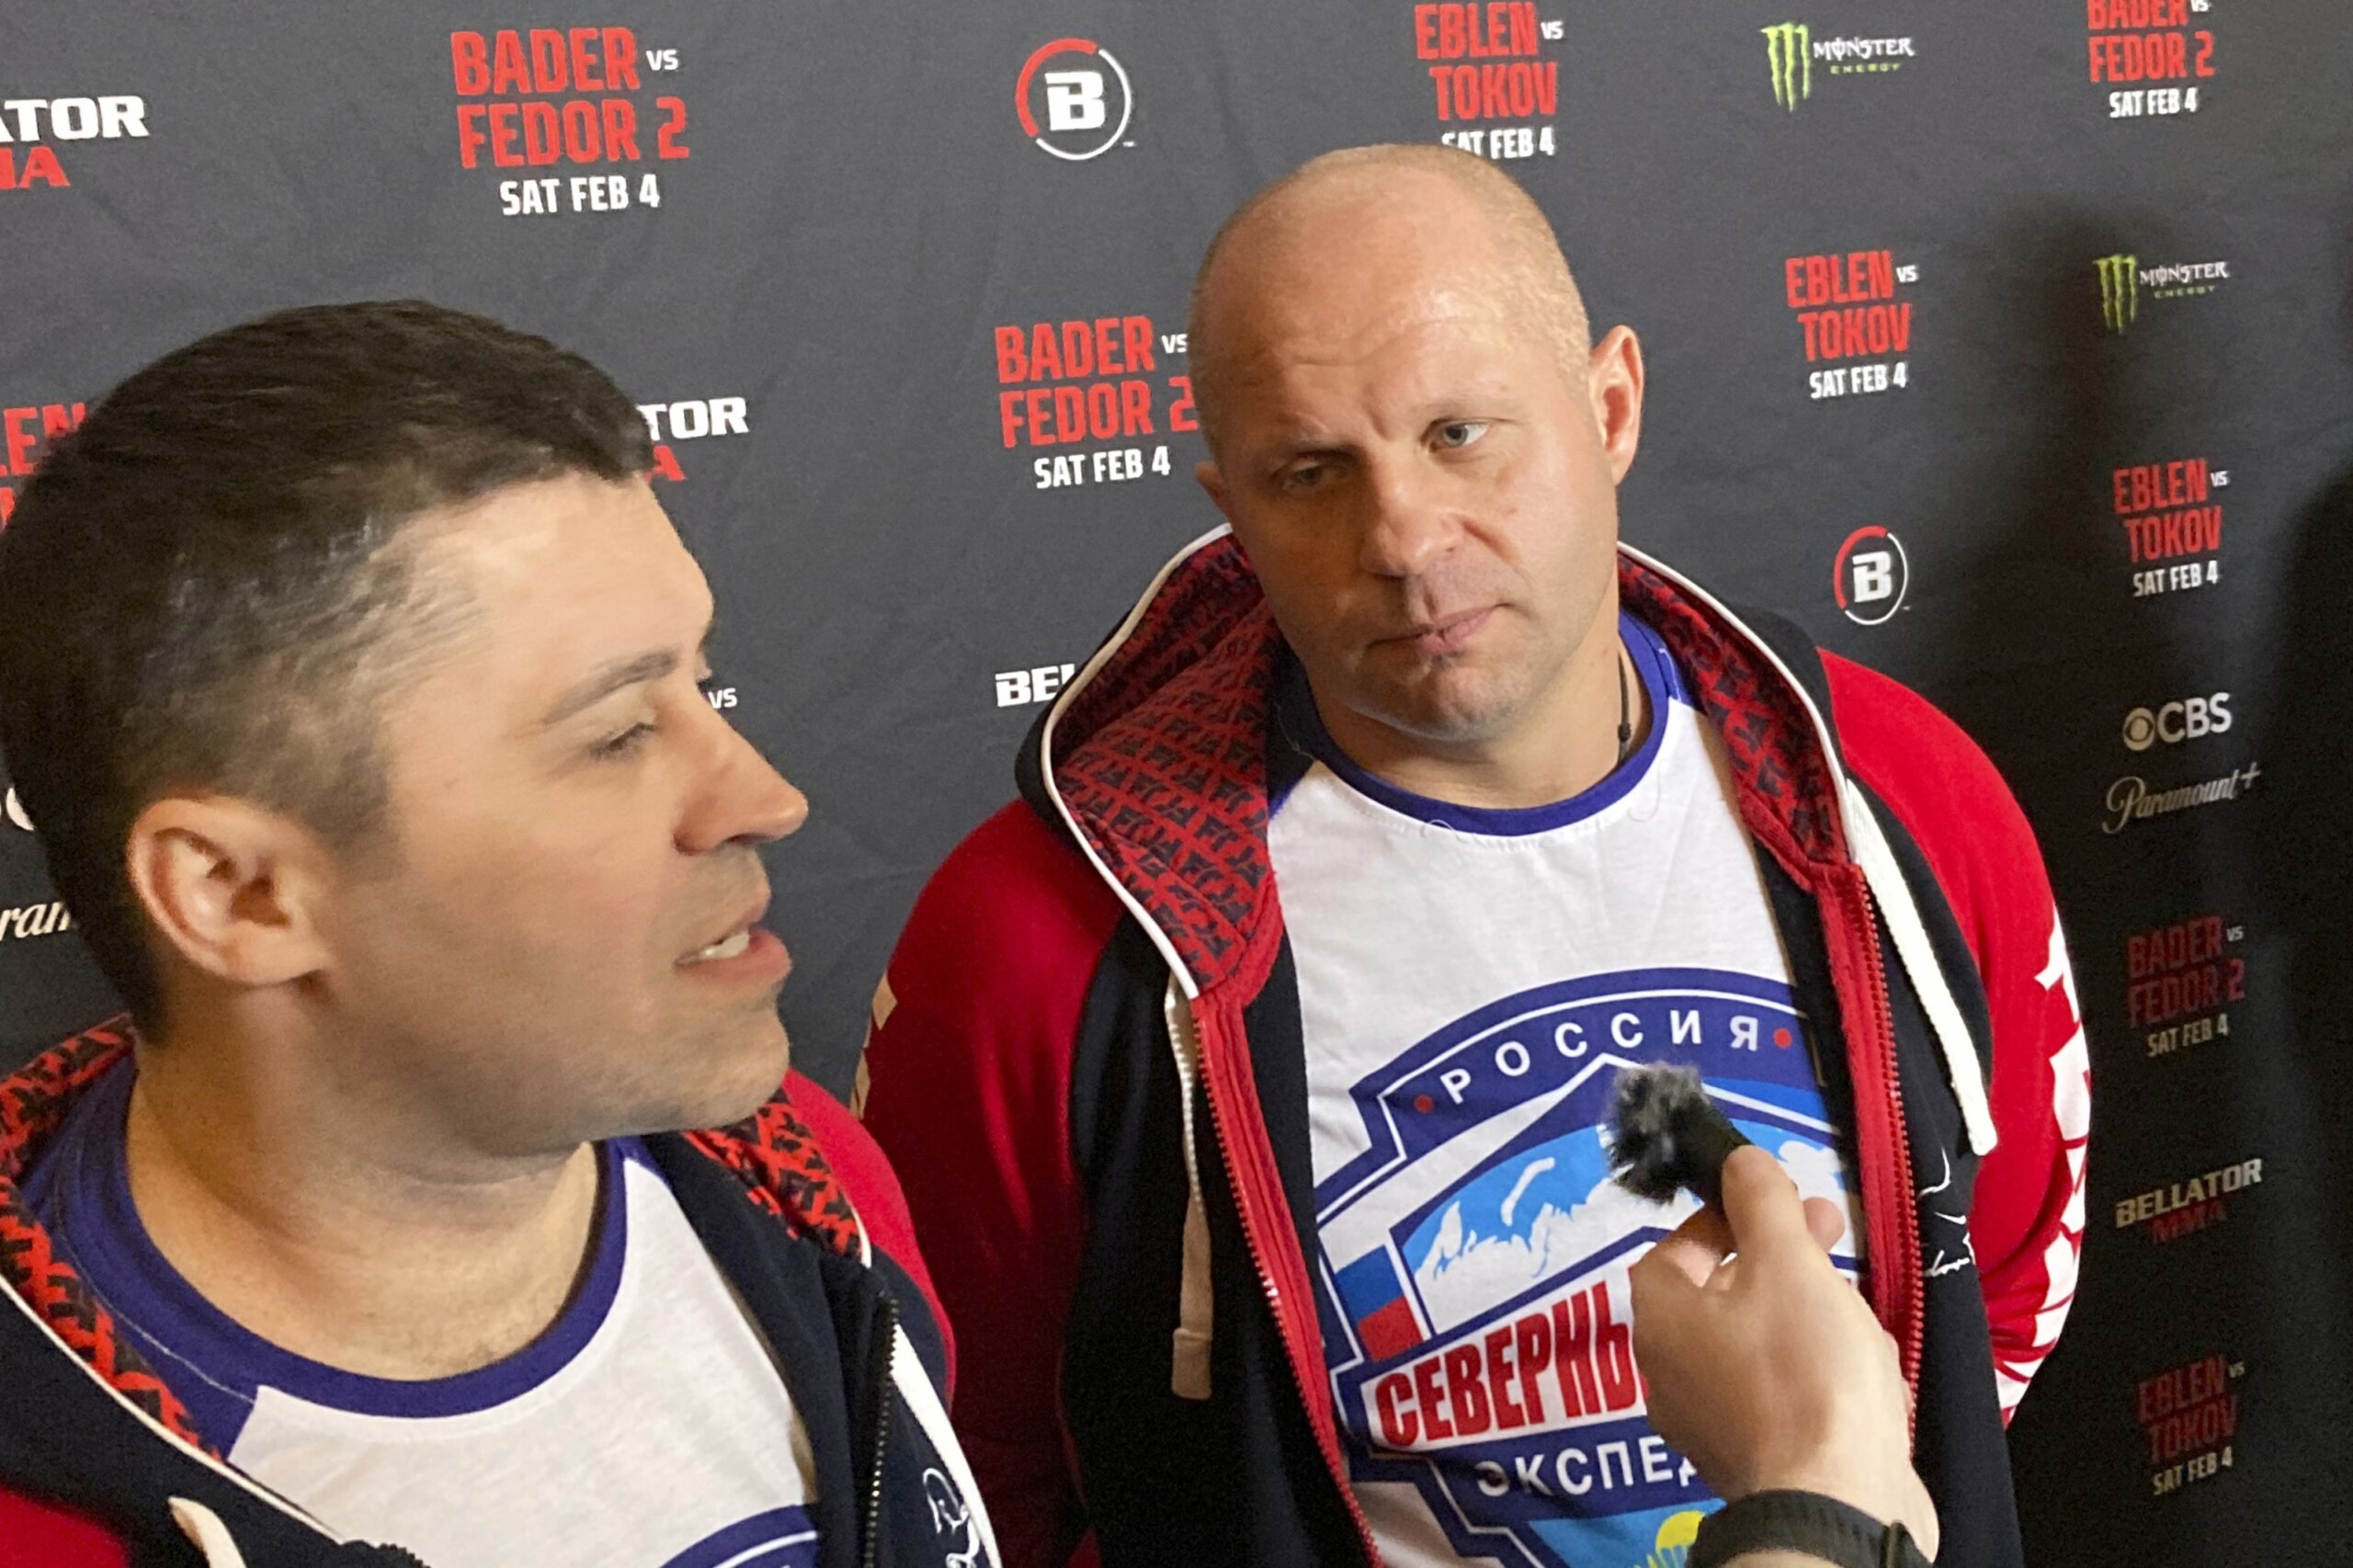 Fedor Emelianenko loses to Bader in Russian star’s last bout